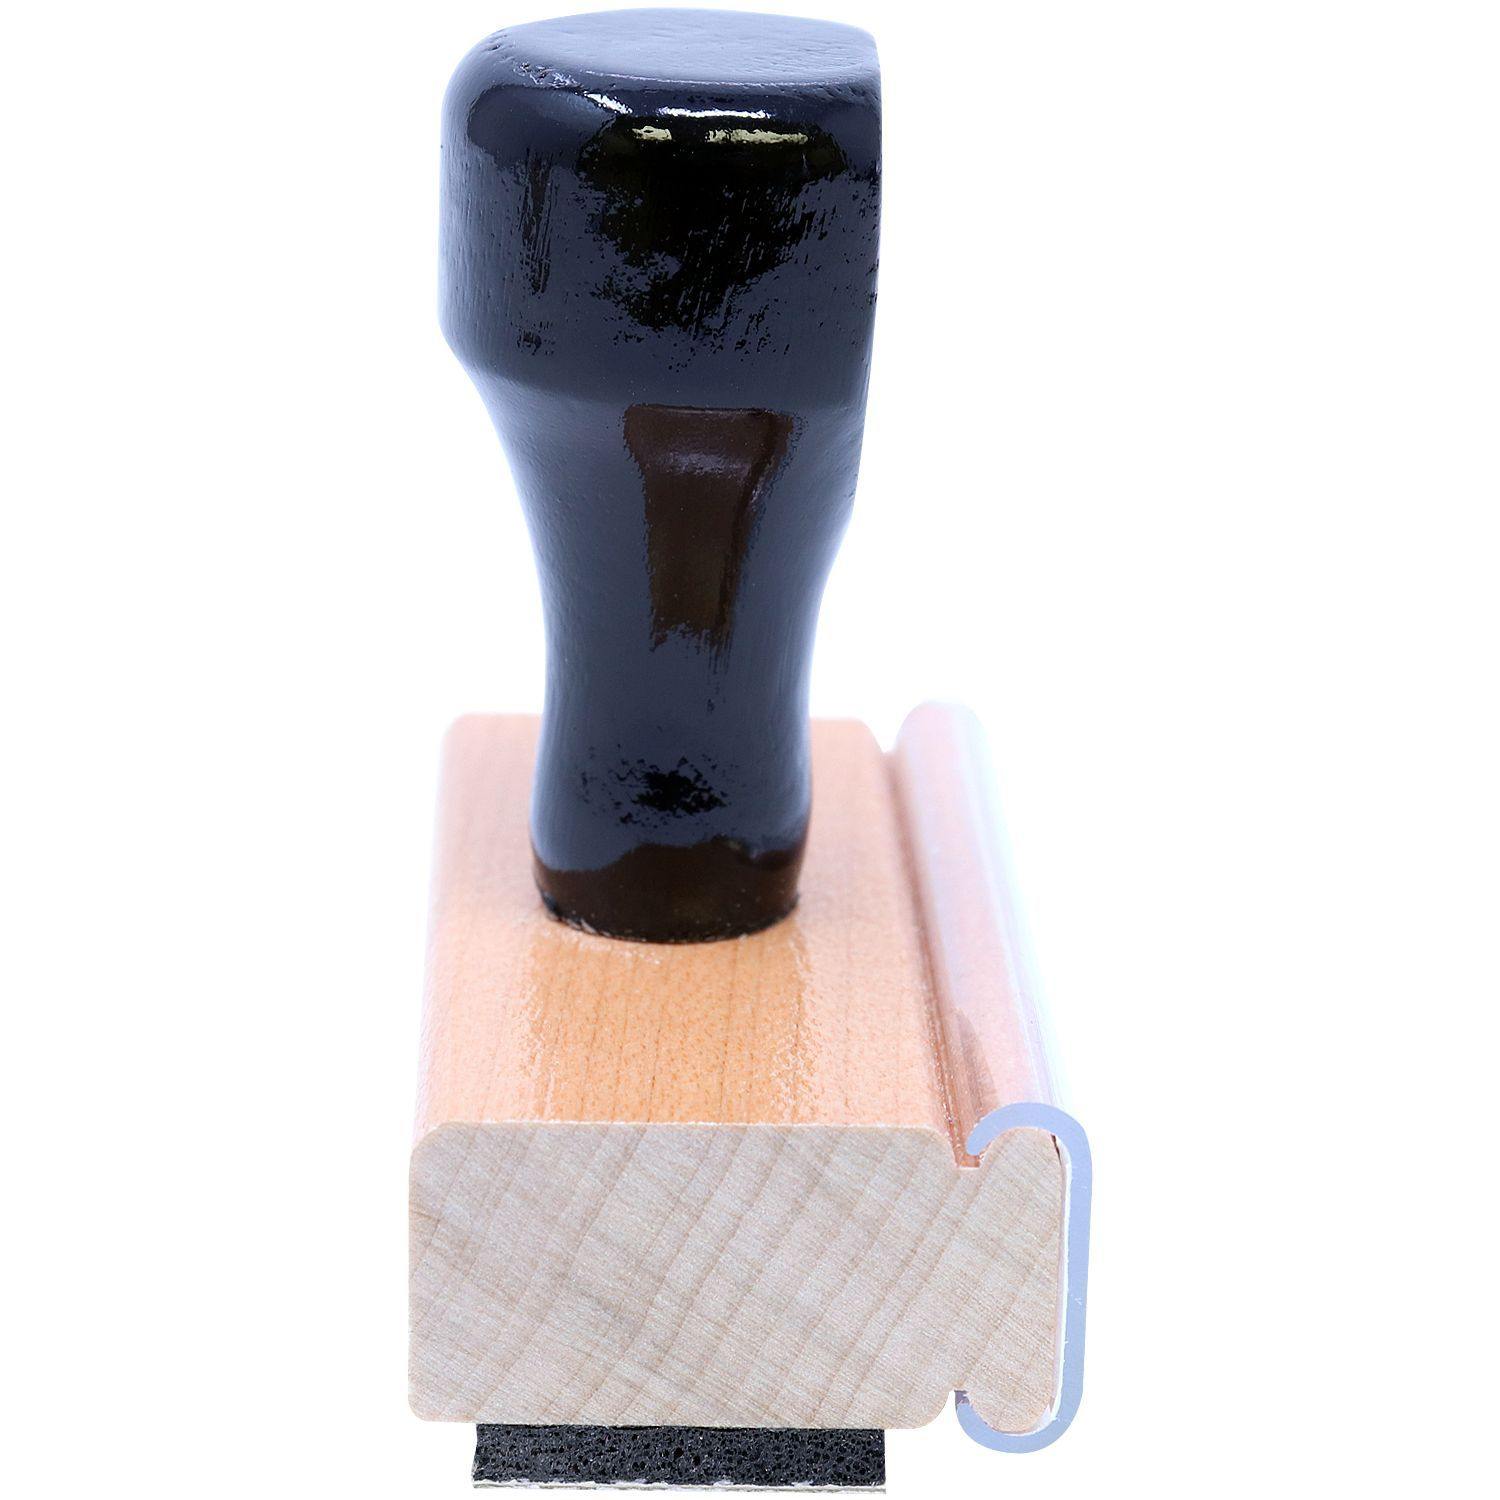 Not Approved For Construction Rubber Stamp - Engineer Seal Stamps - Brand_Acorn, Impression Size_Small, Stamp Type_Regular Stamp, Type of Use_Professional